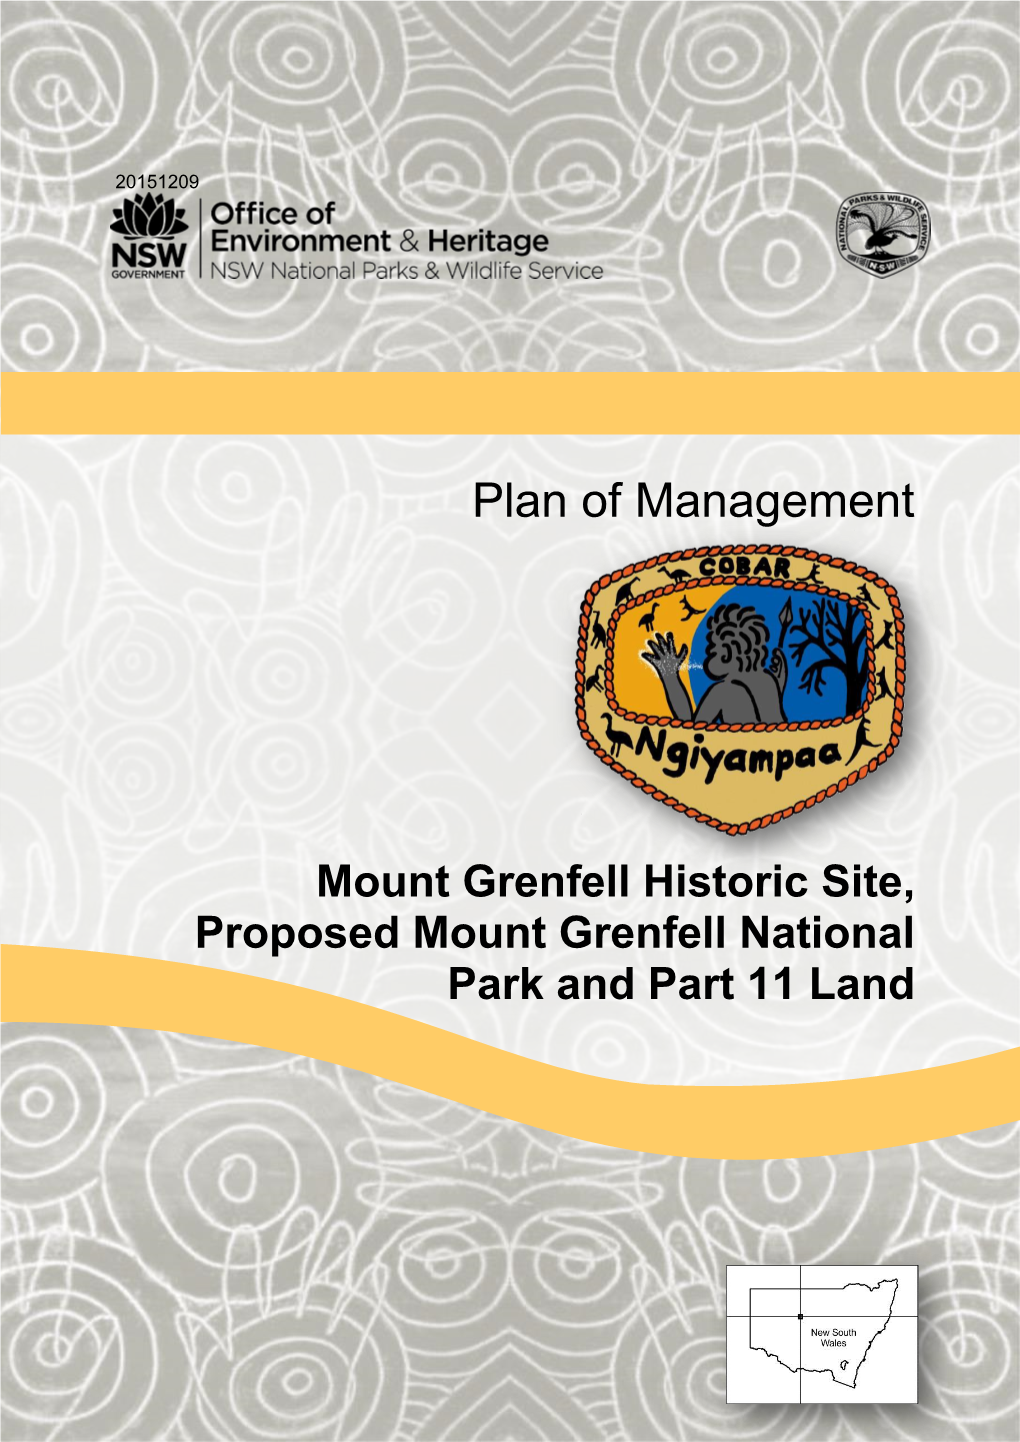 Mount Grenfell Historic Site, Proposed Mount Grenfell National Park and Part 11 Land Plan of Management